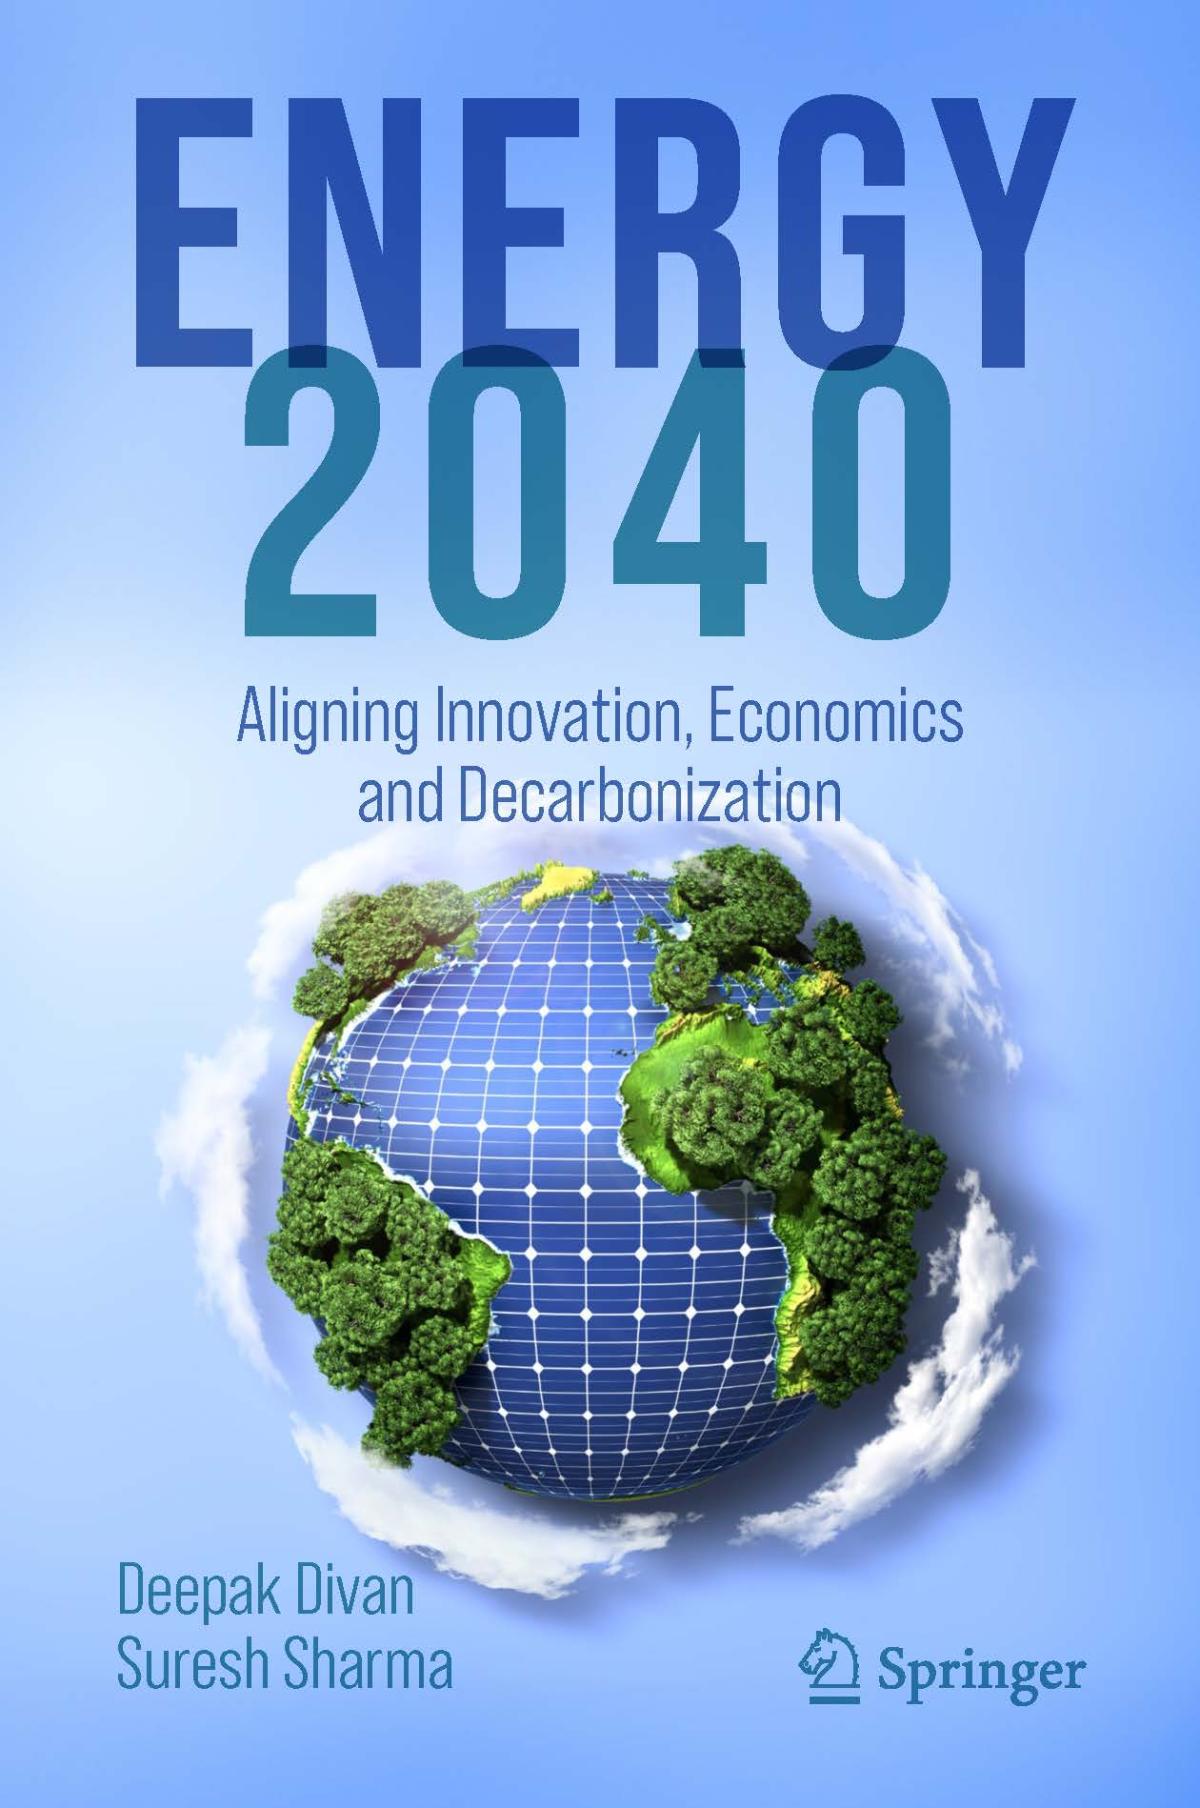 Book cover of ENERGY 2040